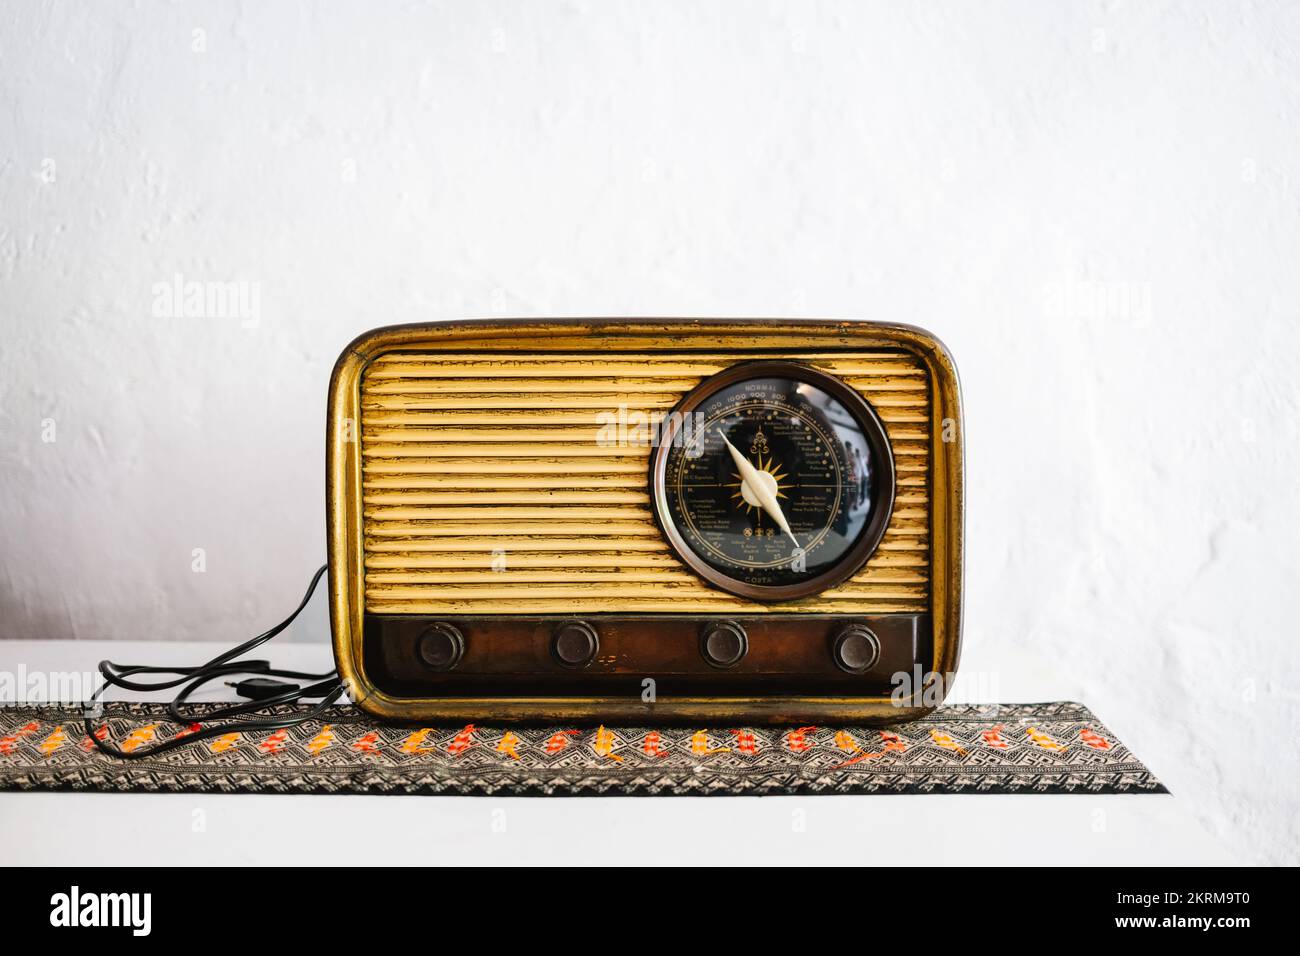 Vintage wood color retro radio placed on table on ornamented fabric against white wall Stock Photo